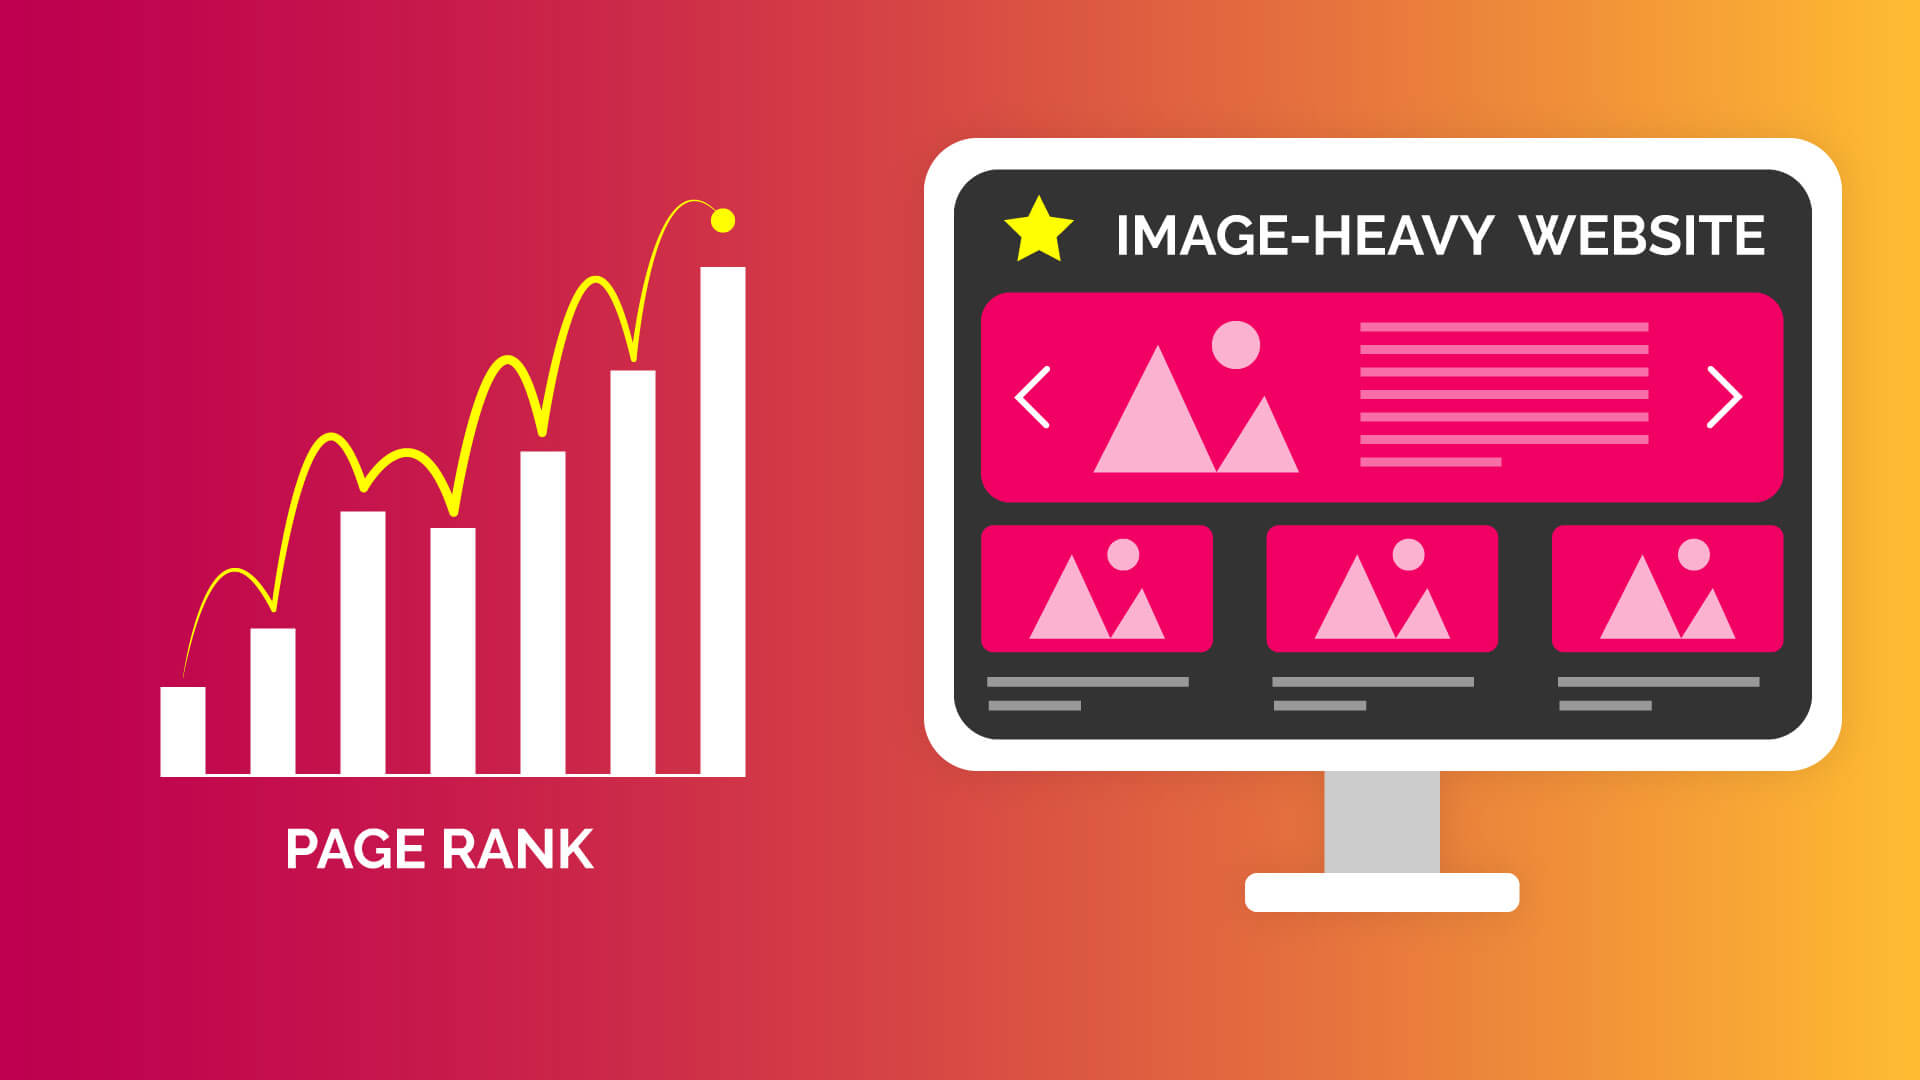 7 Important Steps To Improve Image-Heavy Website Speed and SEO